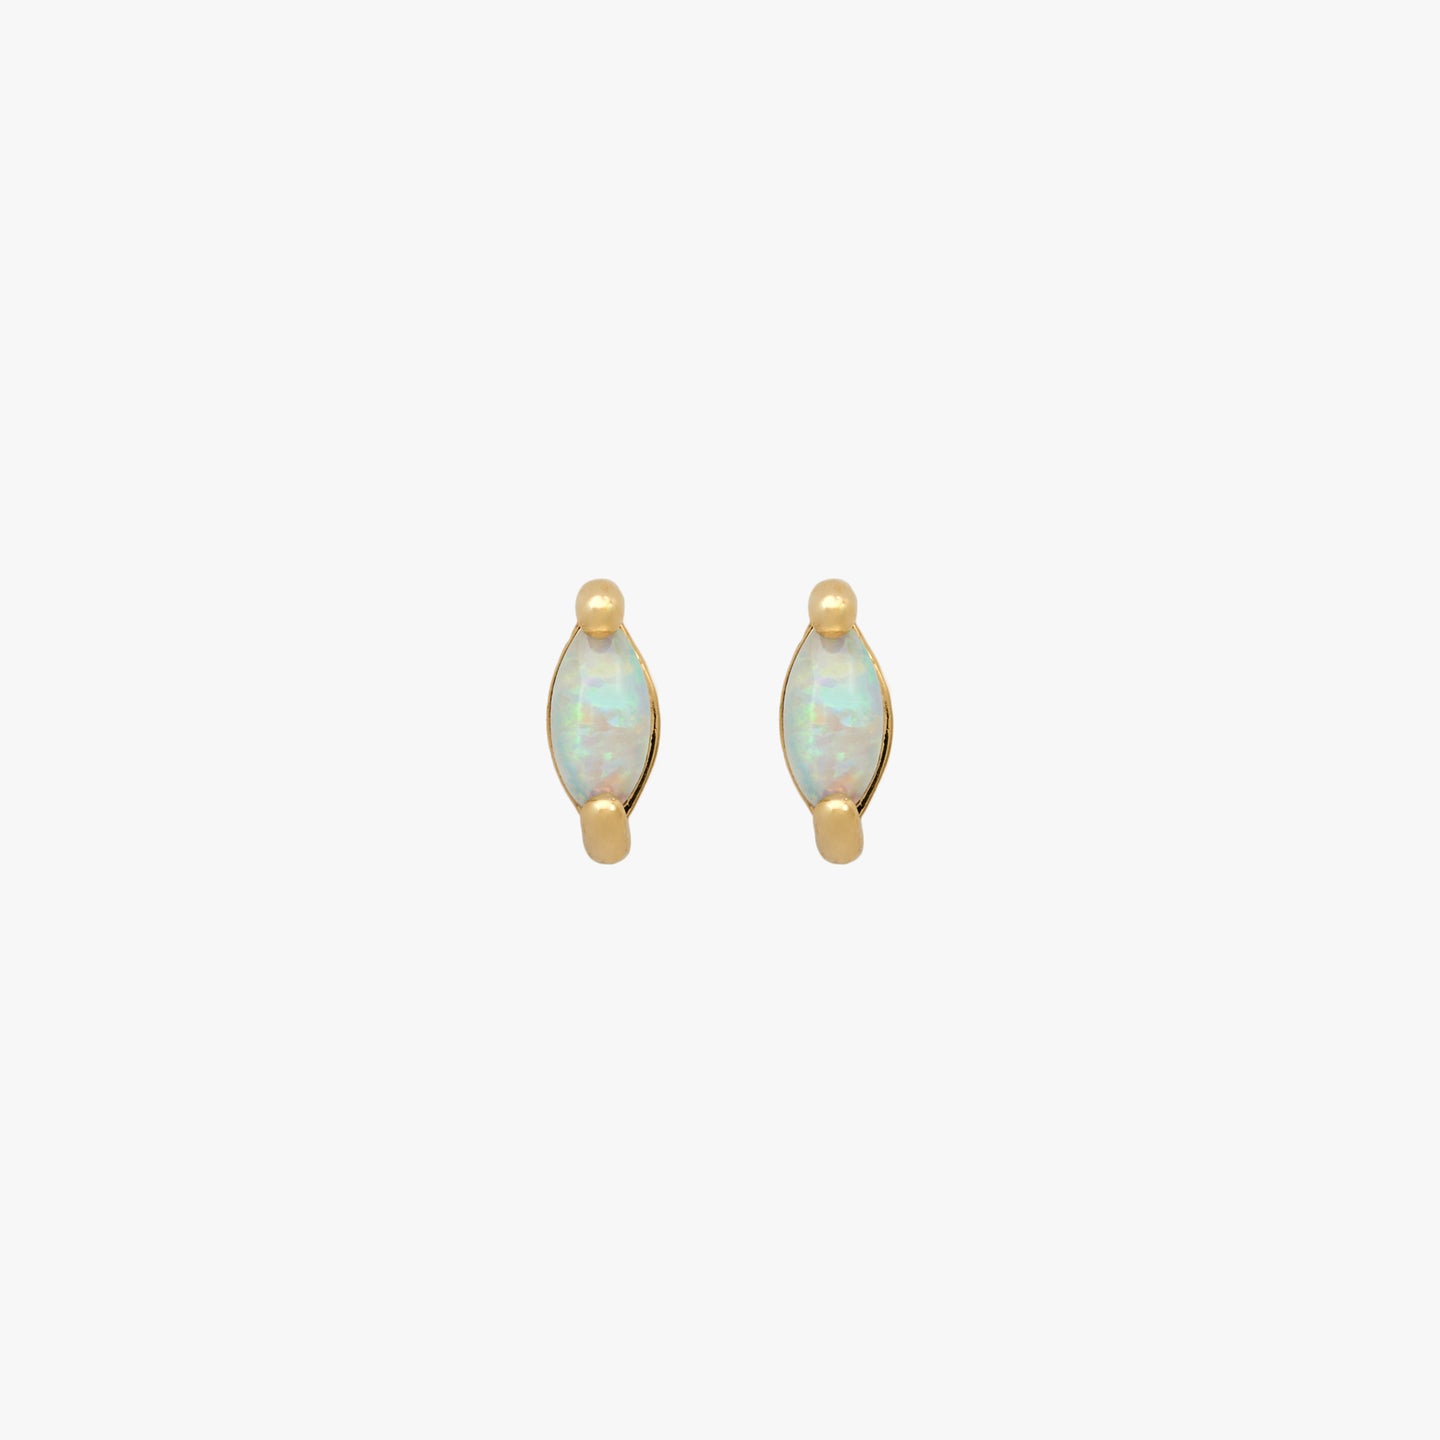 This is a pair of marquise mini studs featuring an opal oblong shaped gems and has gold accents. [pair] color:null|gold/opal